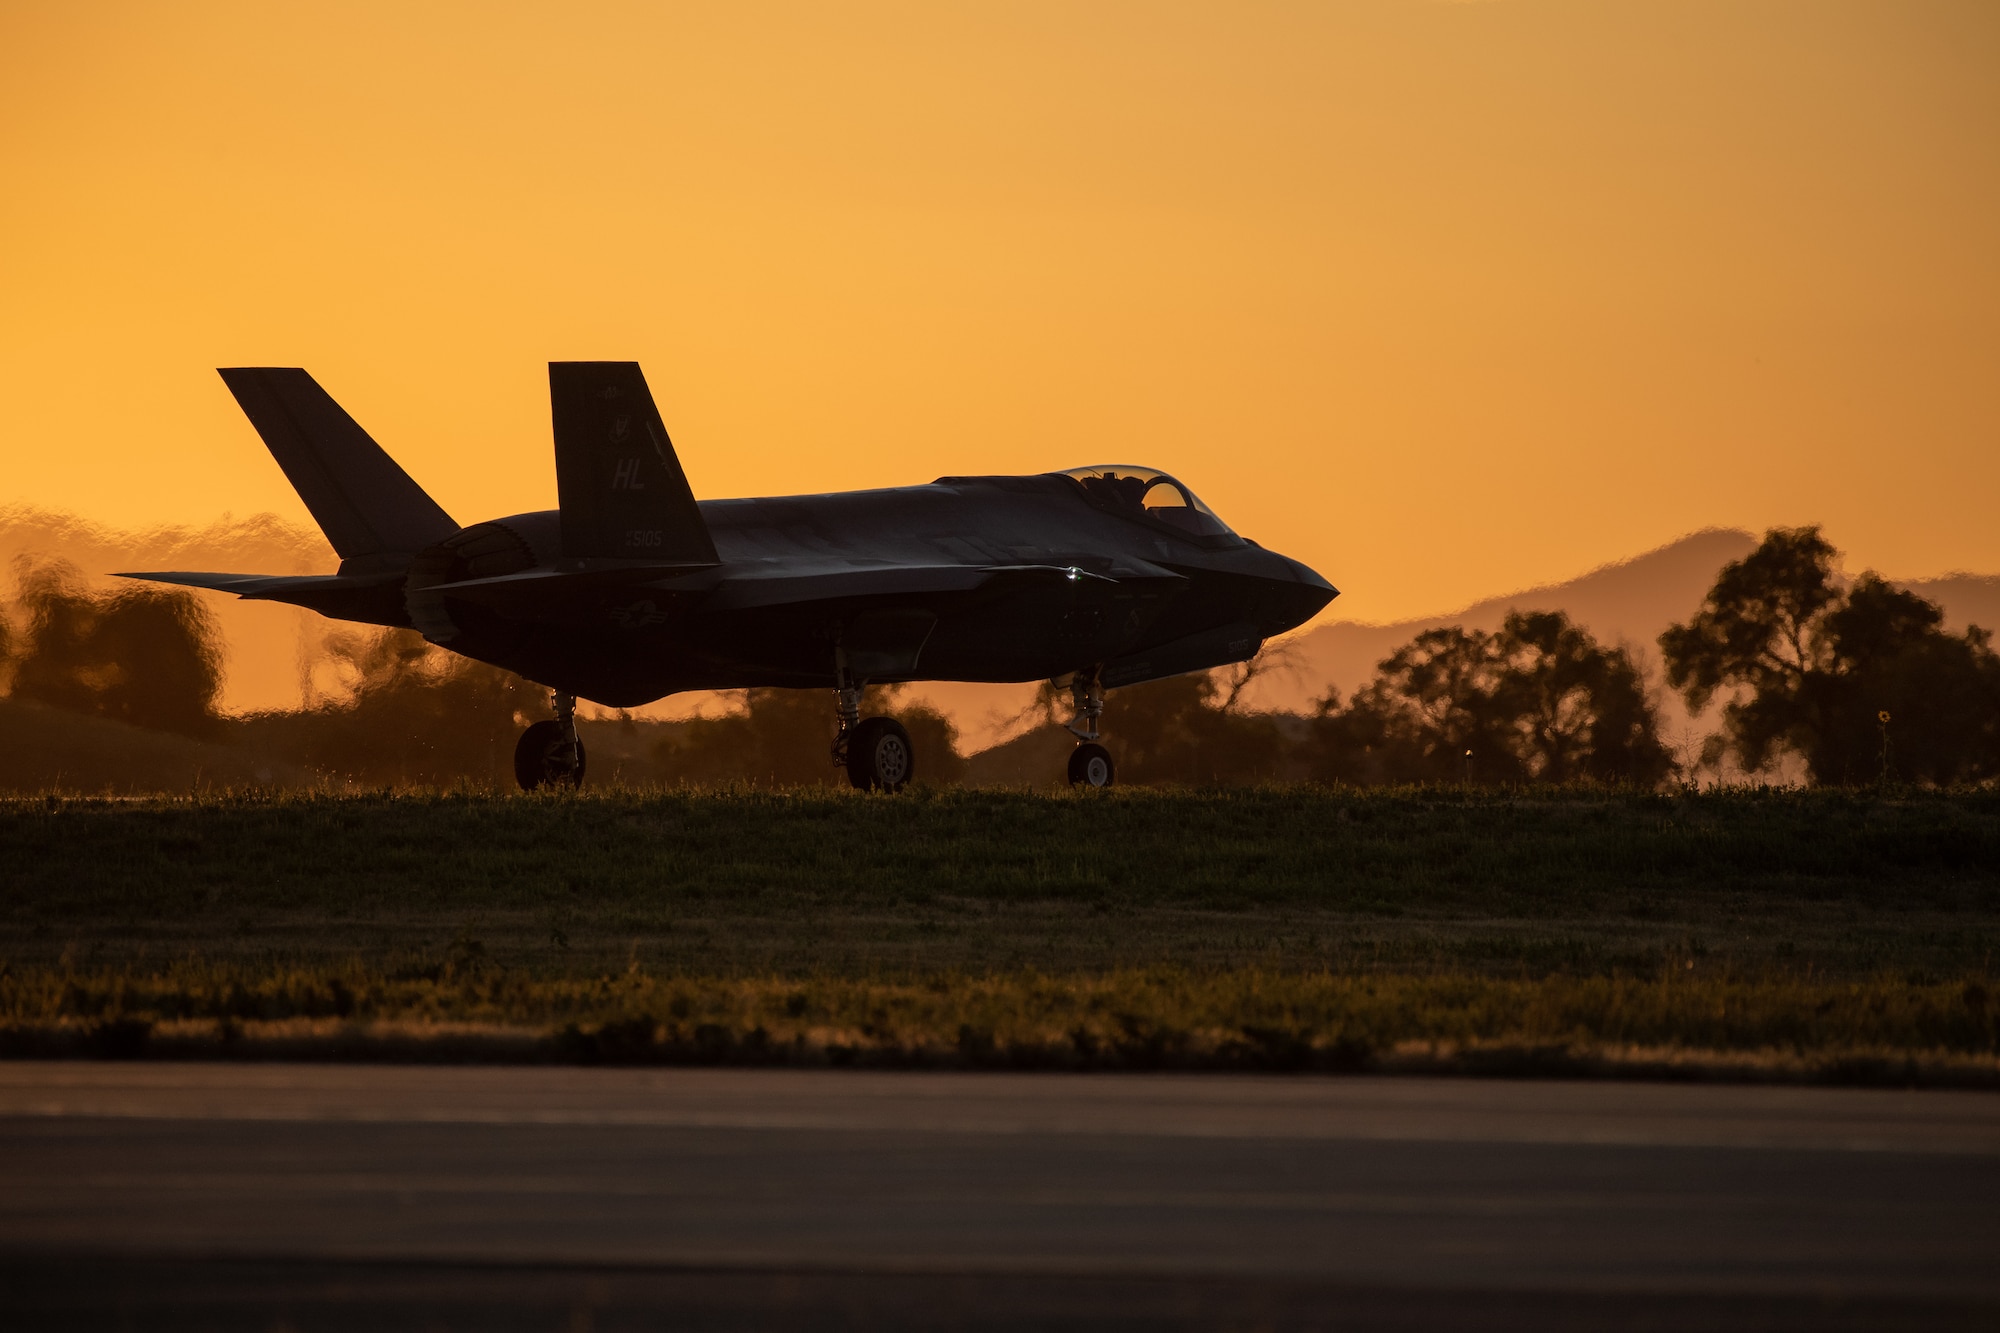 An F-35A taxis prior to take off from Hill Air Force Base, Utah, the evening of Aug. 20, 2019, as the active duty 388th and reserve 419th Fighter Wings conducted local night flying operations. The wings are required to train at night to maintain their readiness and all-weather capabilities. Increased flying also provides a valuable opportunity to evaluate aircraft maintenance resiliency and operational agility. (U.S. Air Force photo by R. Nial Bradshaw)